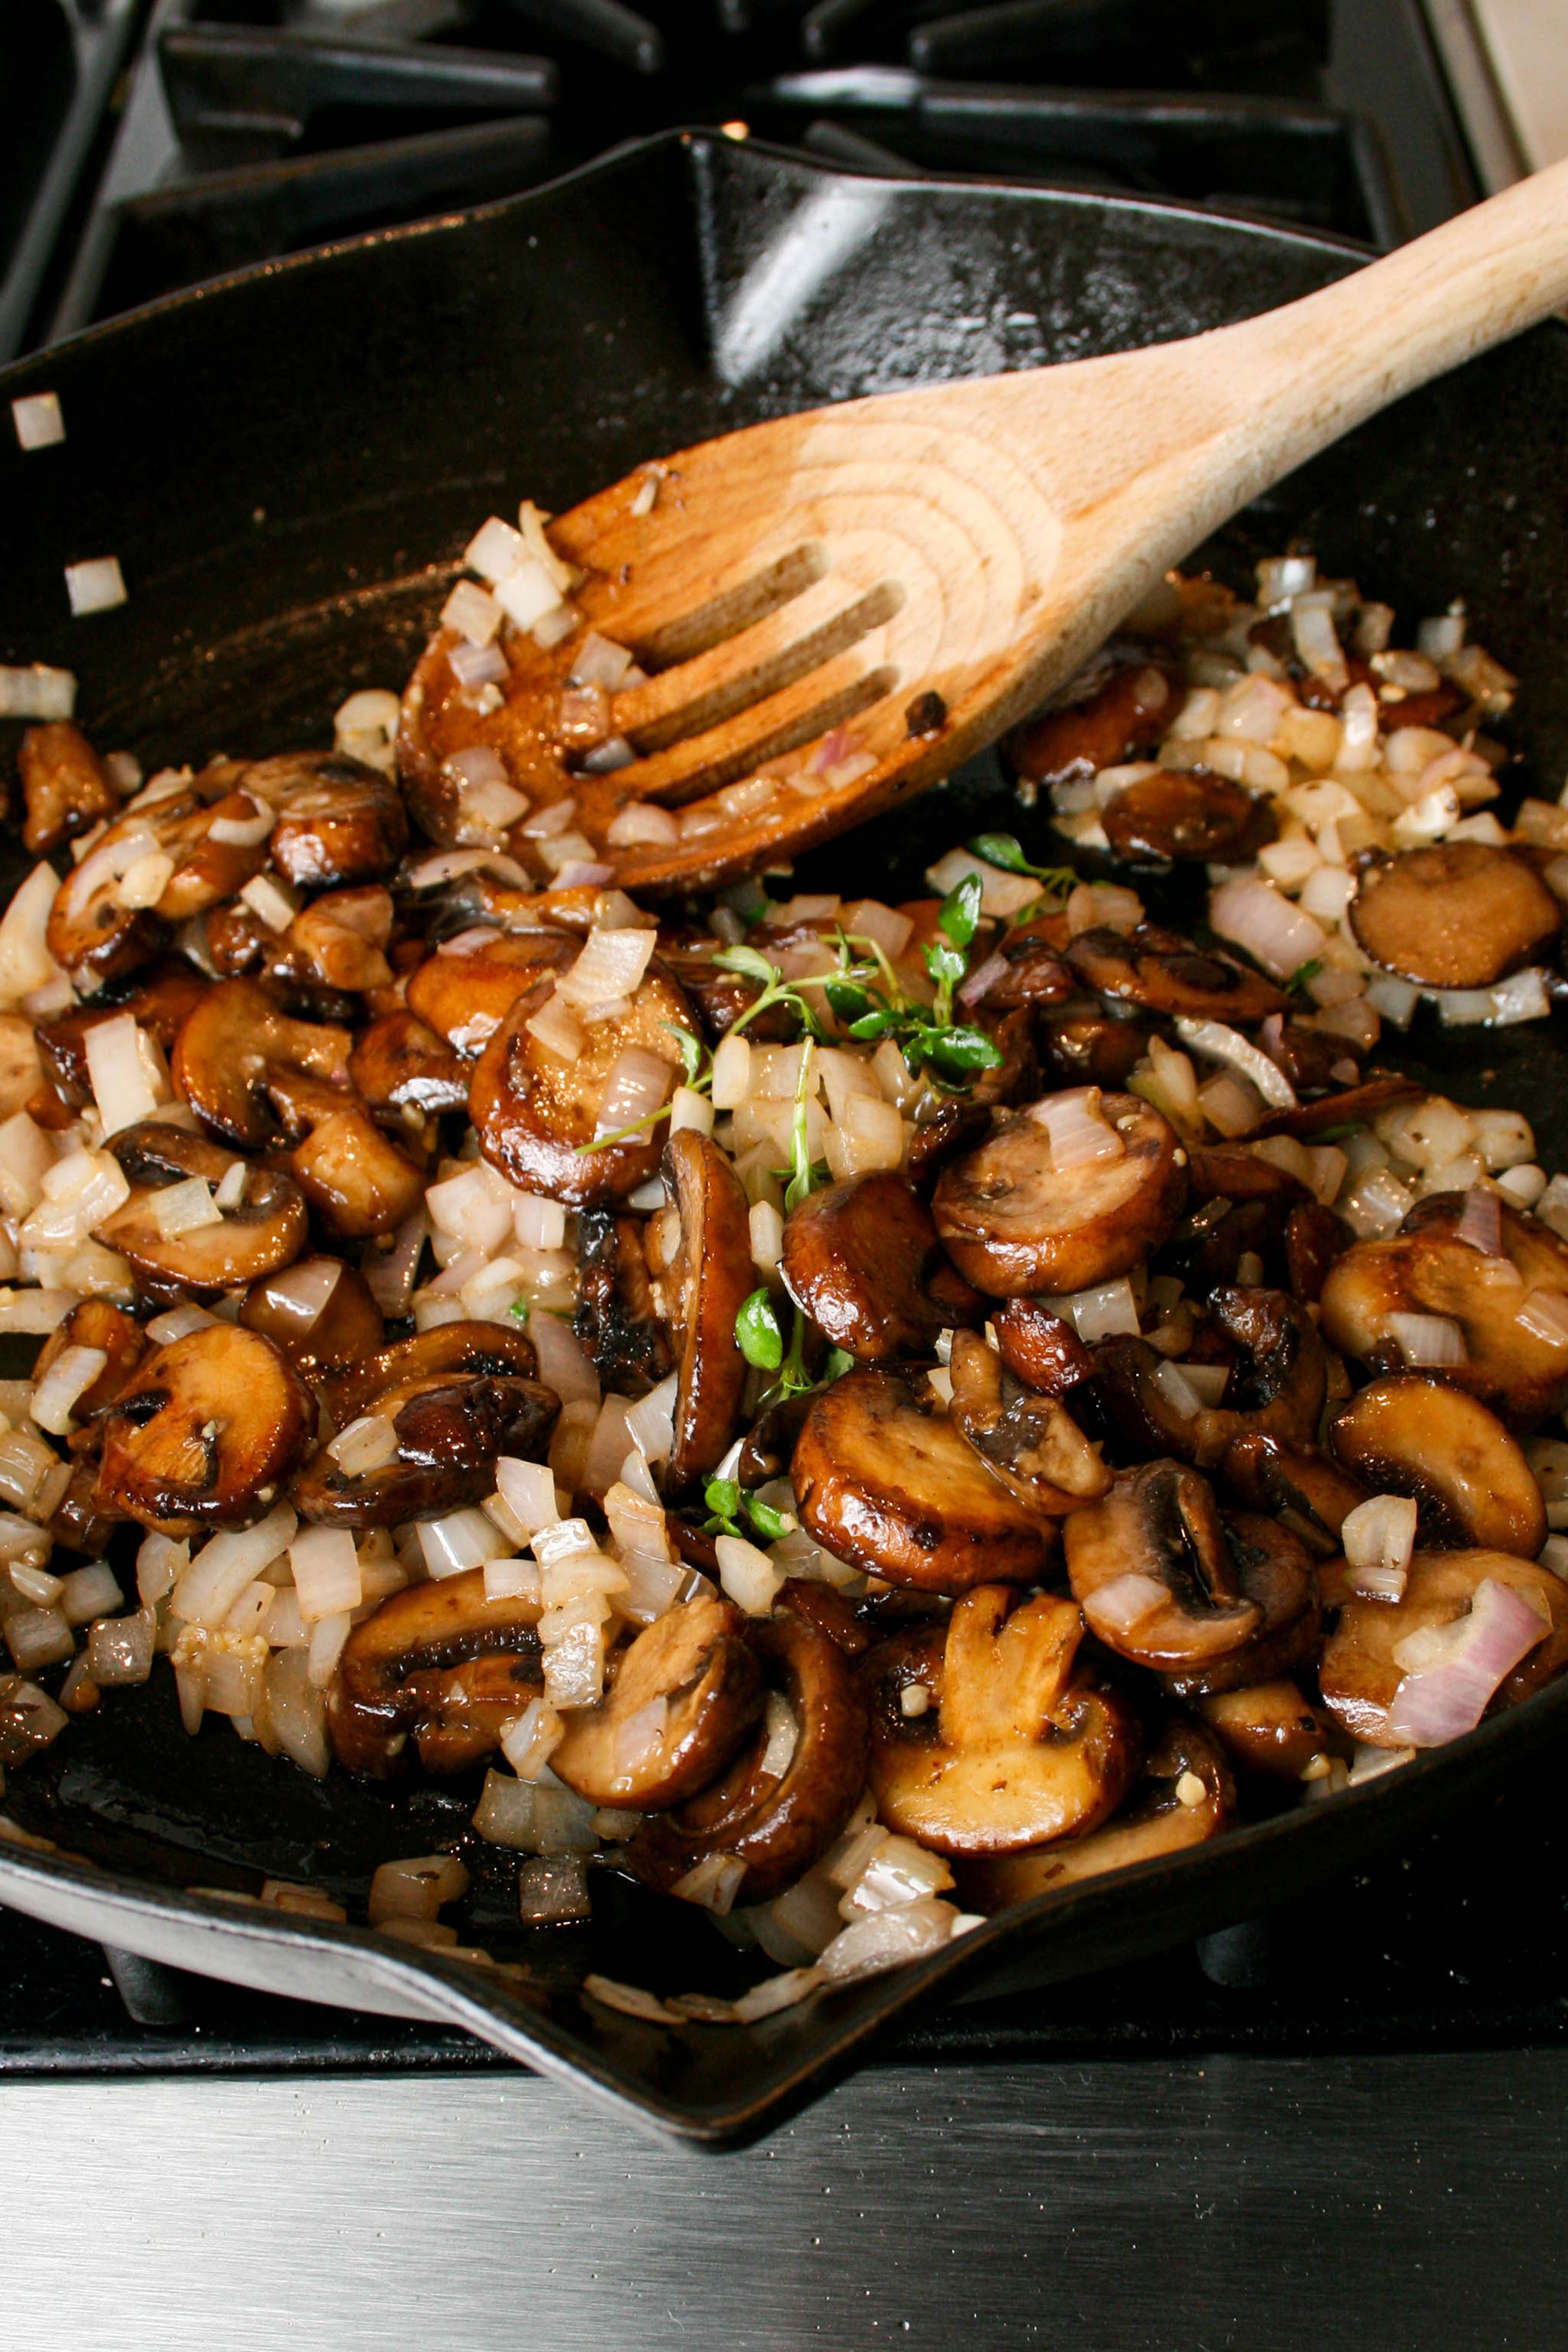 Sautéed mushrooms, shallots, garlic, and thyme in a cast iron skillet